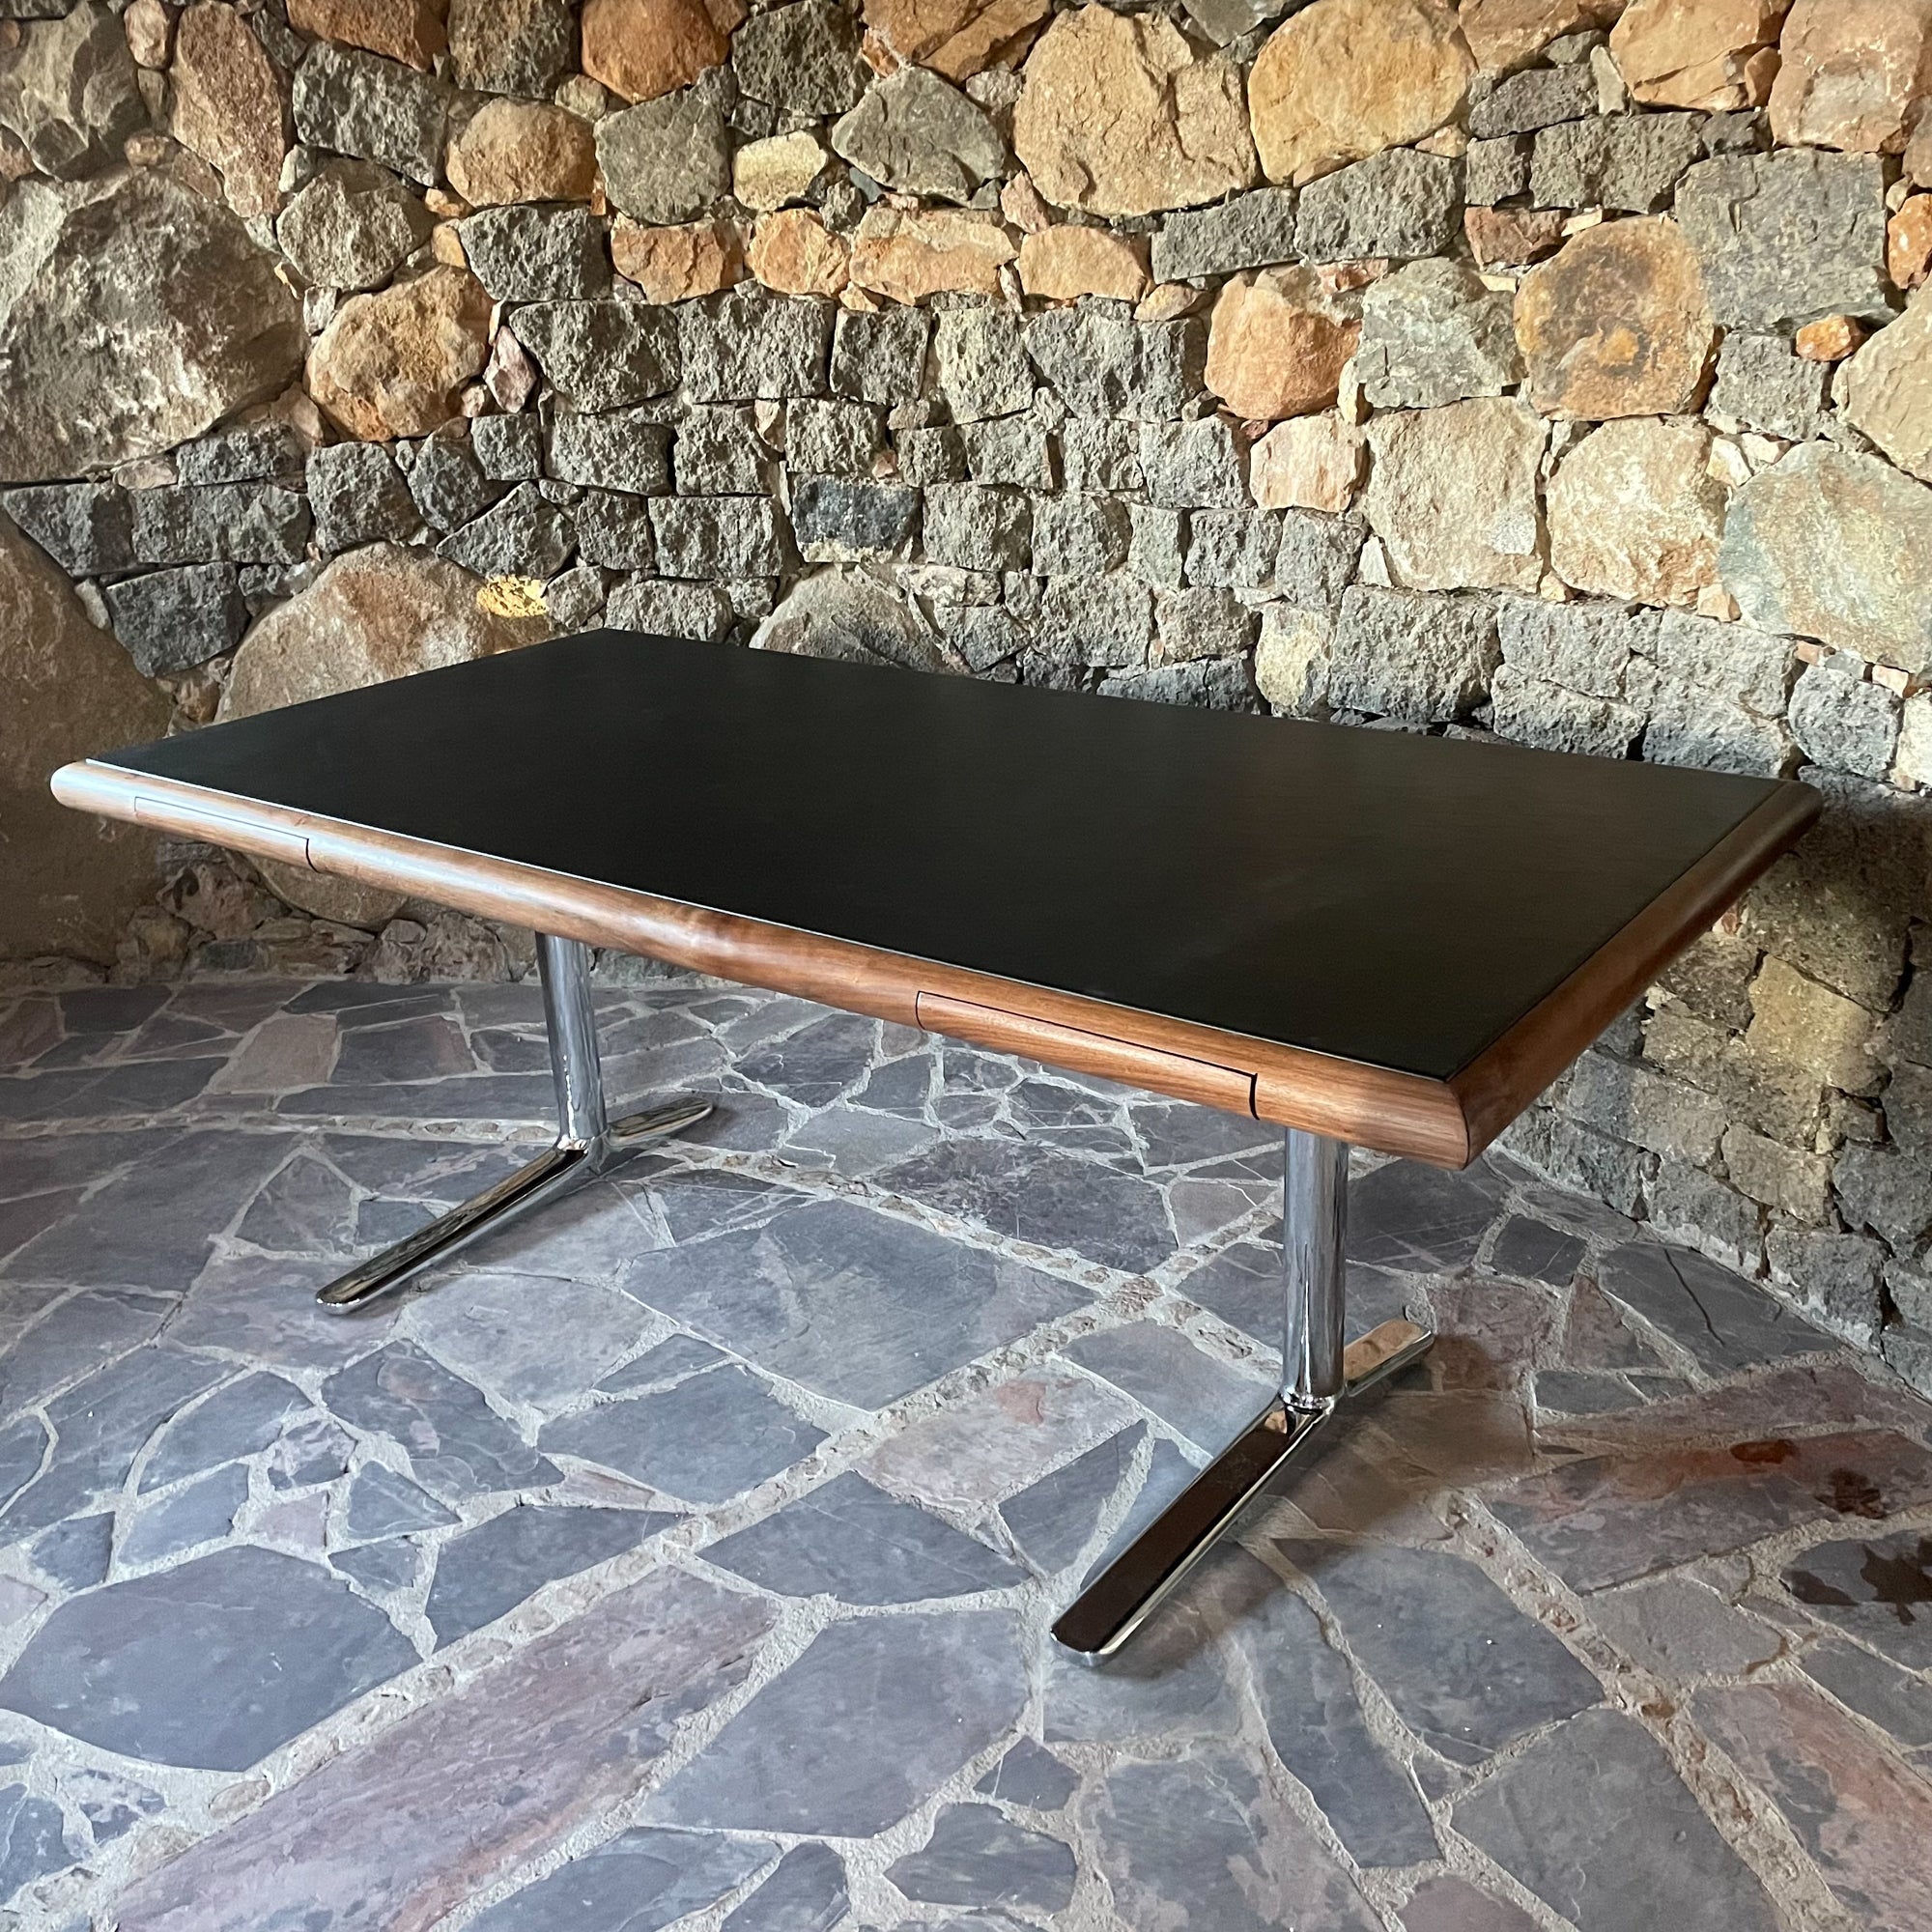 Desk
1960s Modern Desk designed by Warren Platner for Knoll. Chrome plated legs in a cantilever design. Luxurious Walnut Wood with black faux leather top. Sculptural pullout drawers. 
Original Vintage Restored. Excellent condition. No label